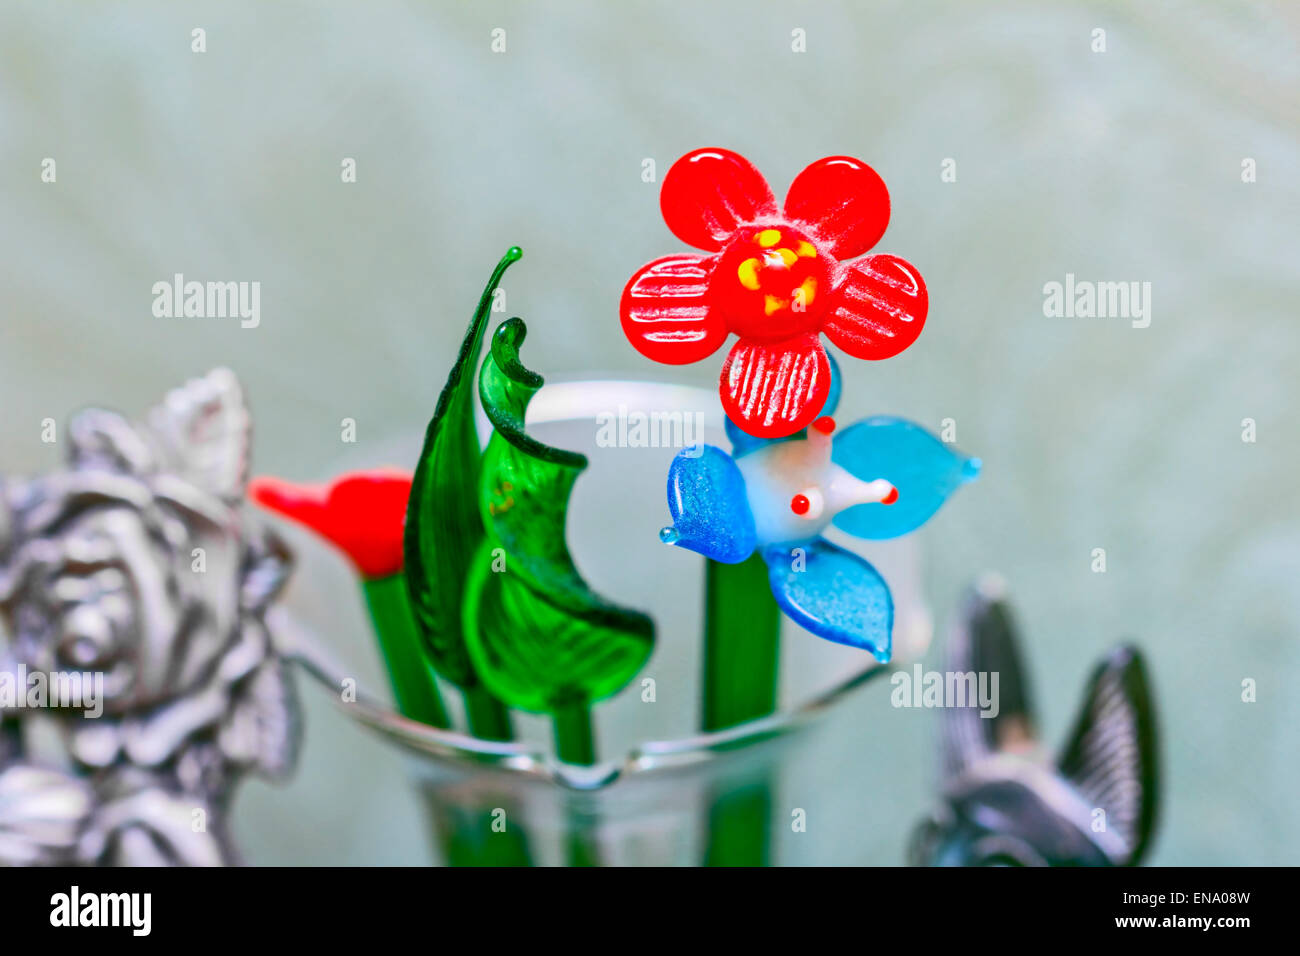 Nice glass flowers and scarlet flower in middle Stock Photo